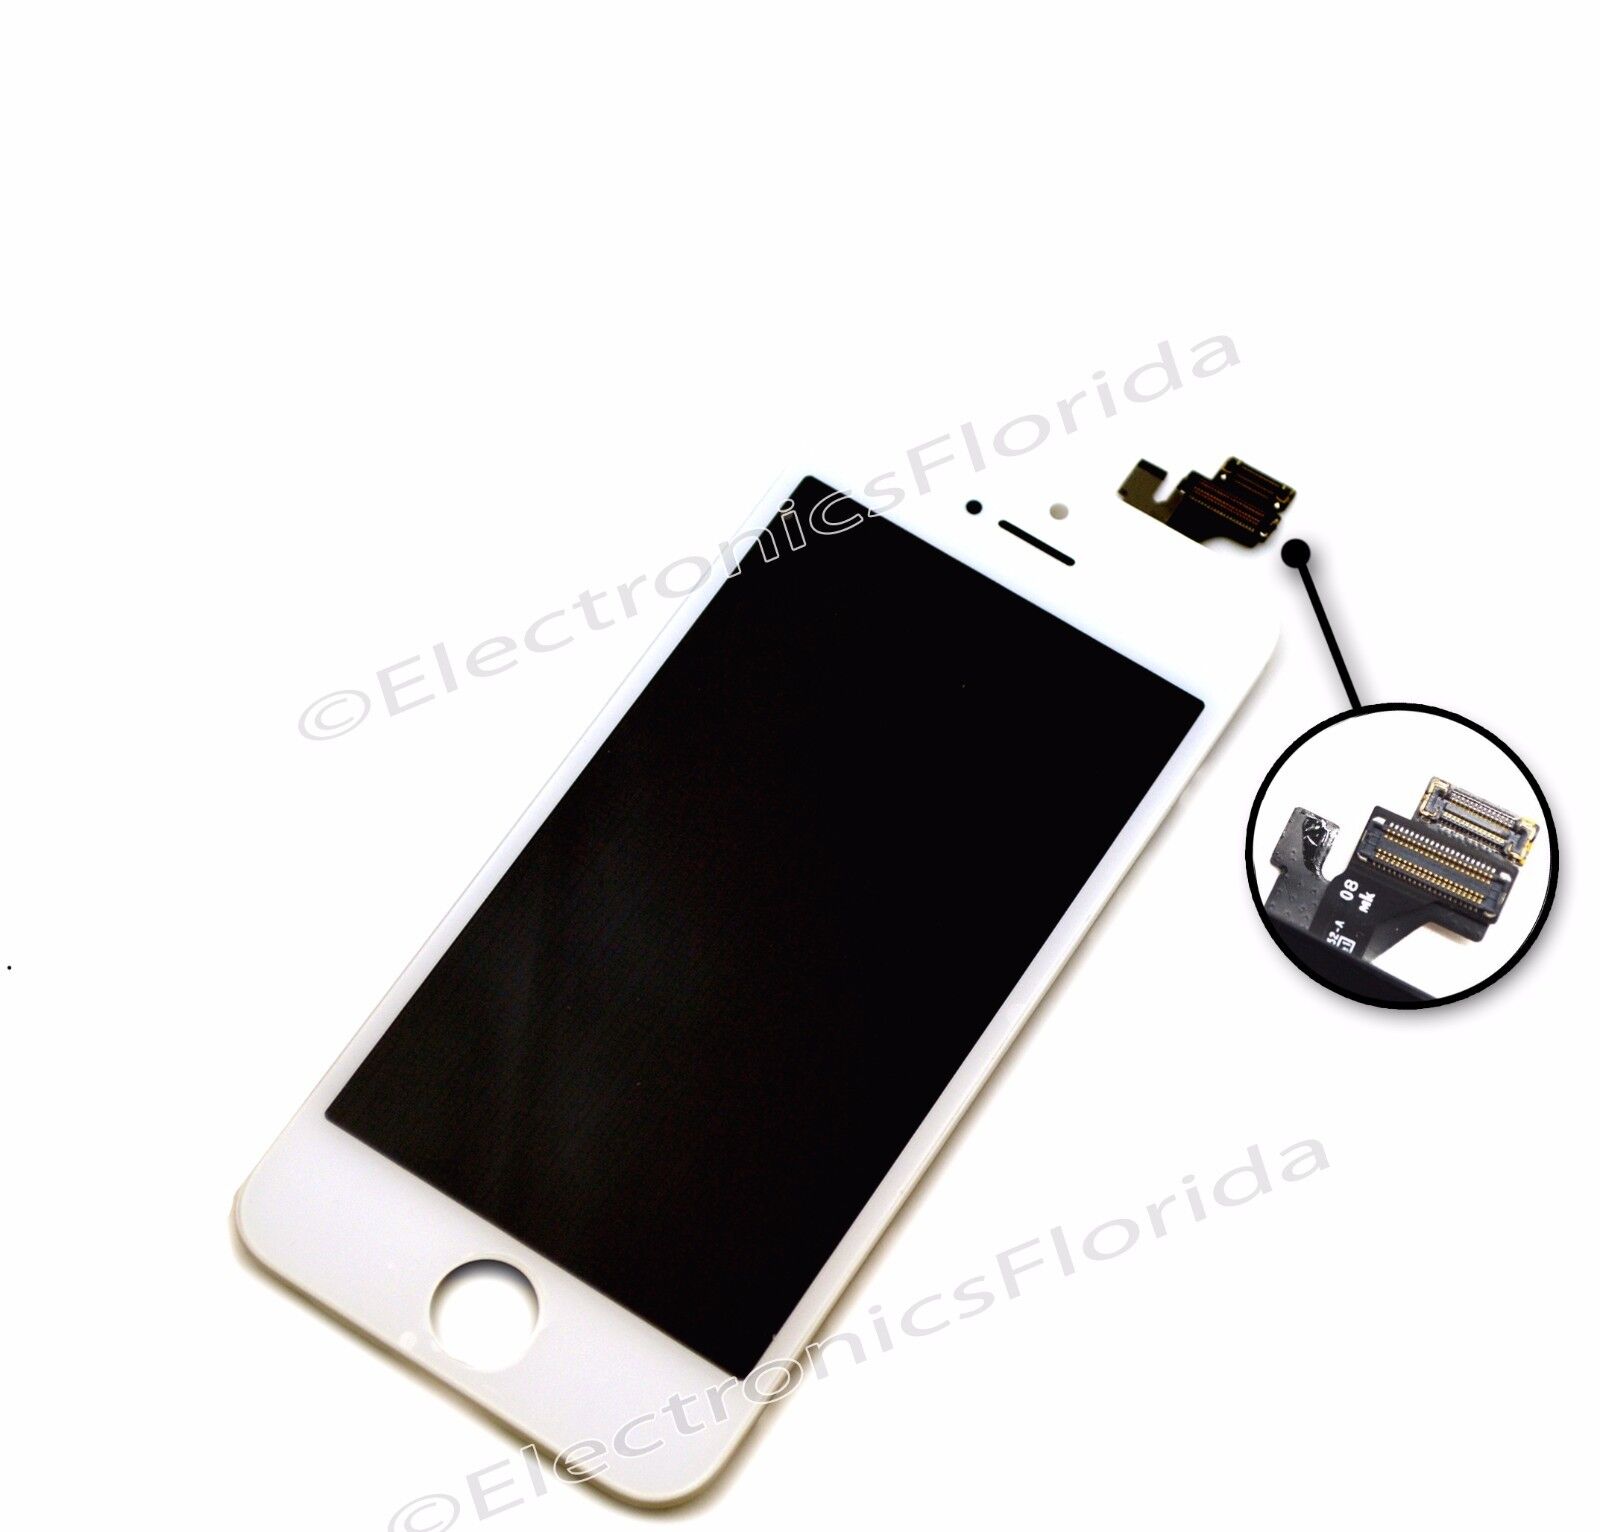 White LCD Screen Replacement Digitizer Glass Assembly For iPhone 5 Premium